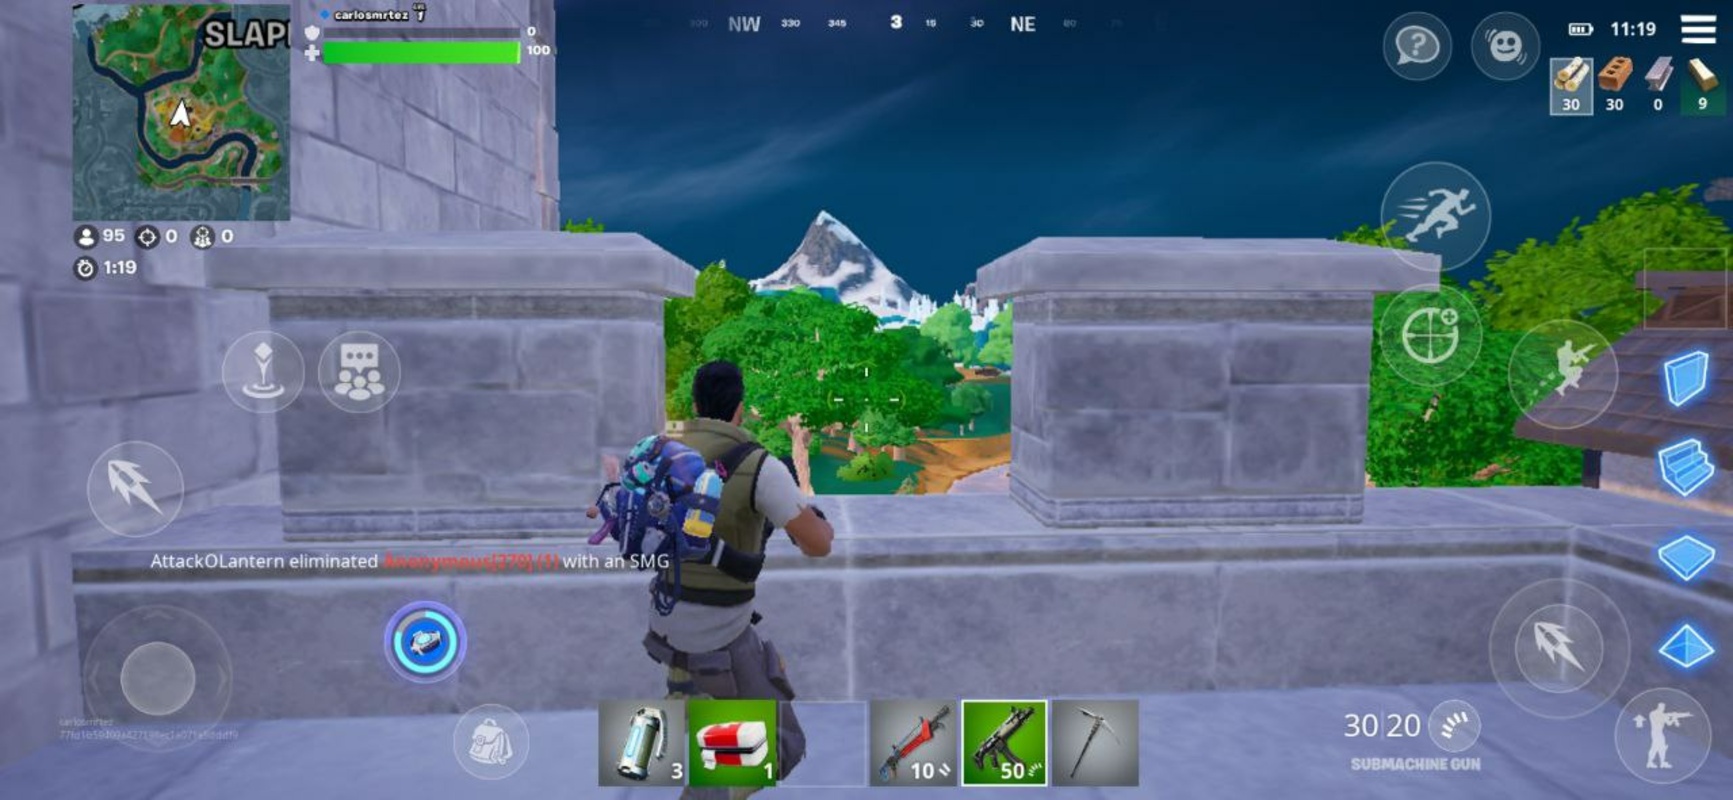 Fortnite 29.10.0-32391220-Android APK for Android Screenshot 9